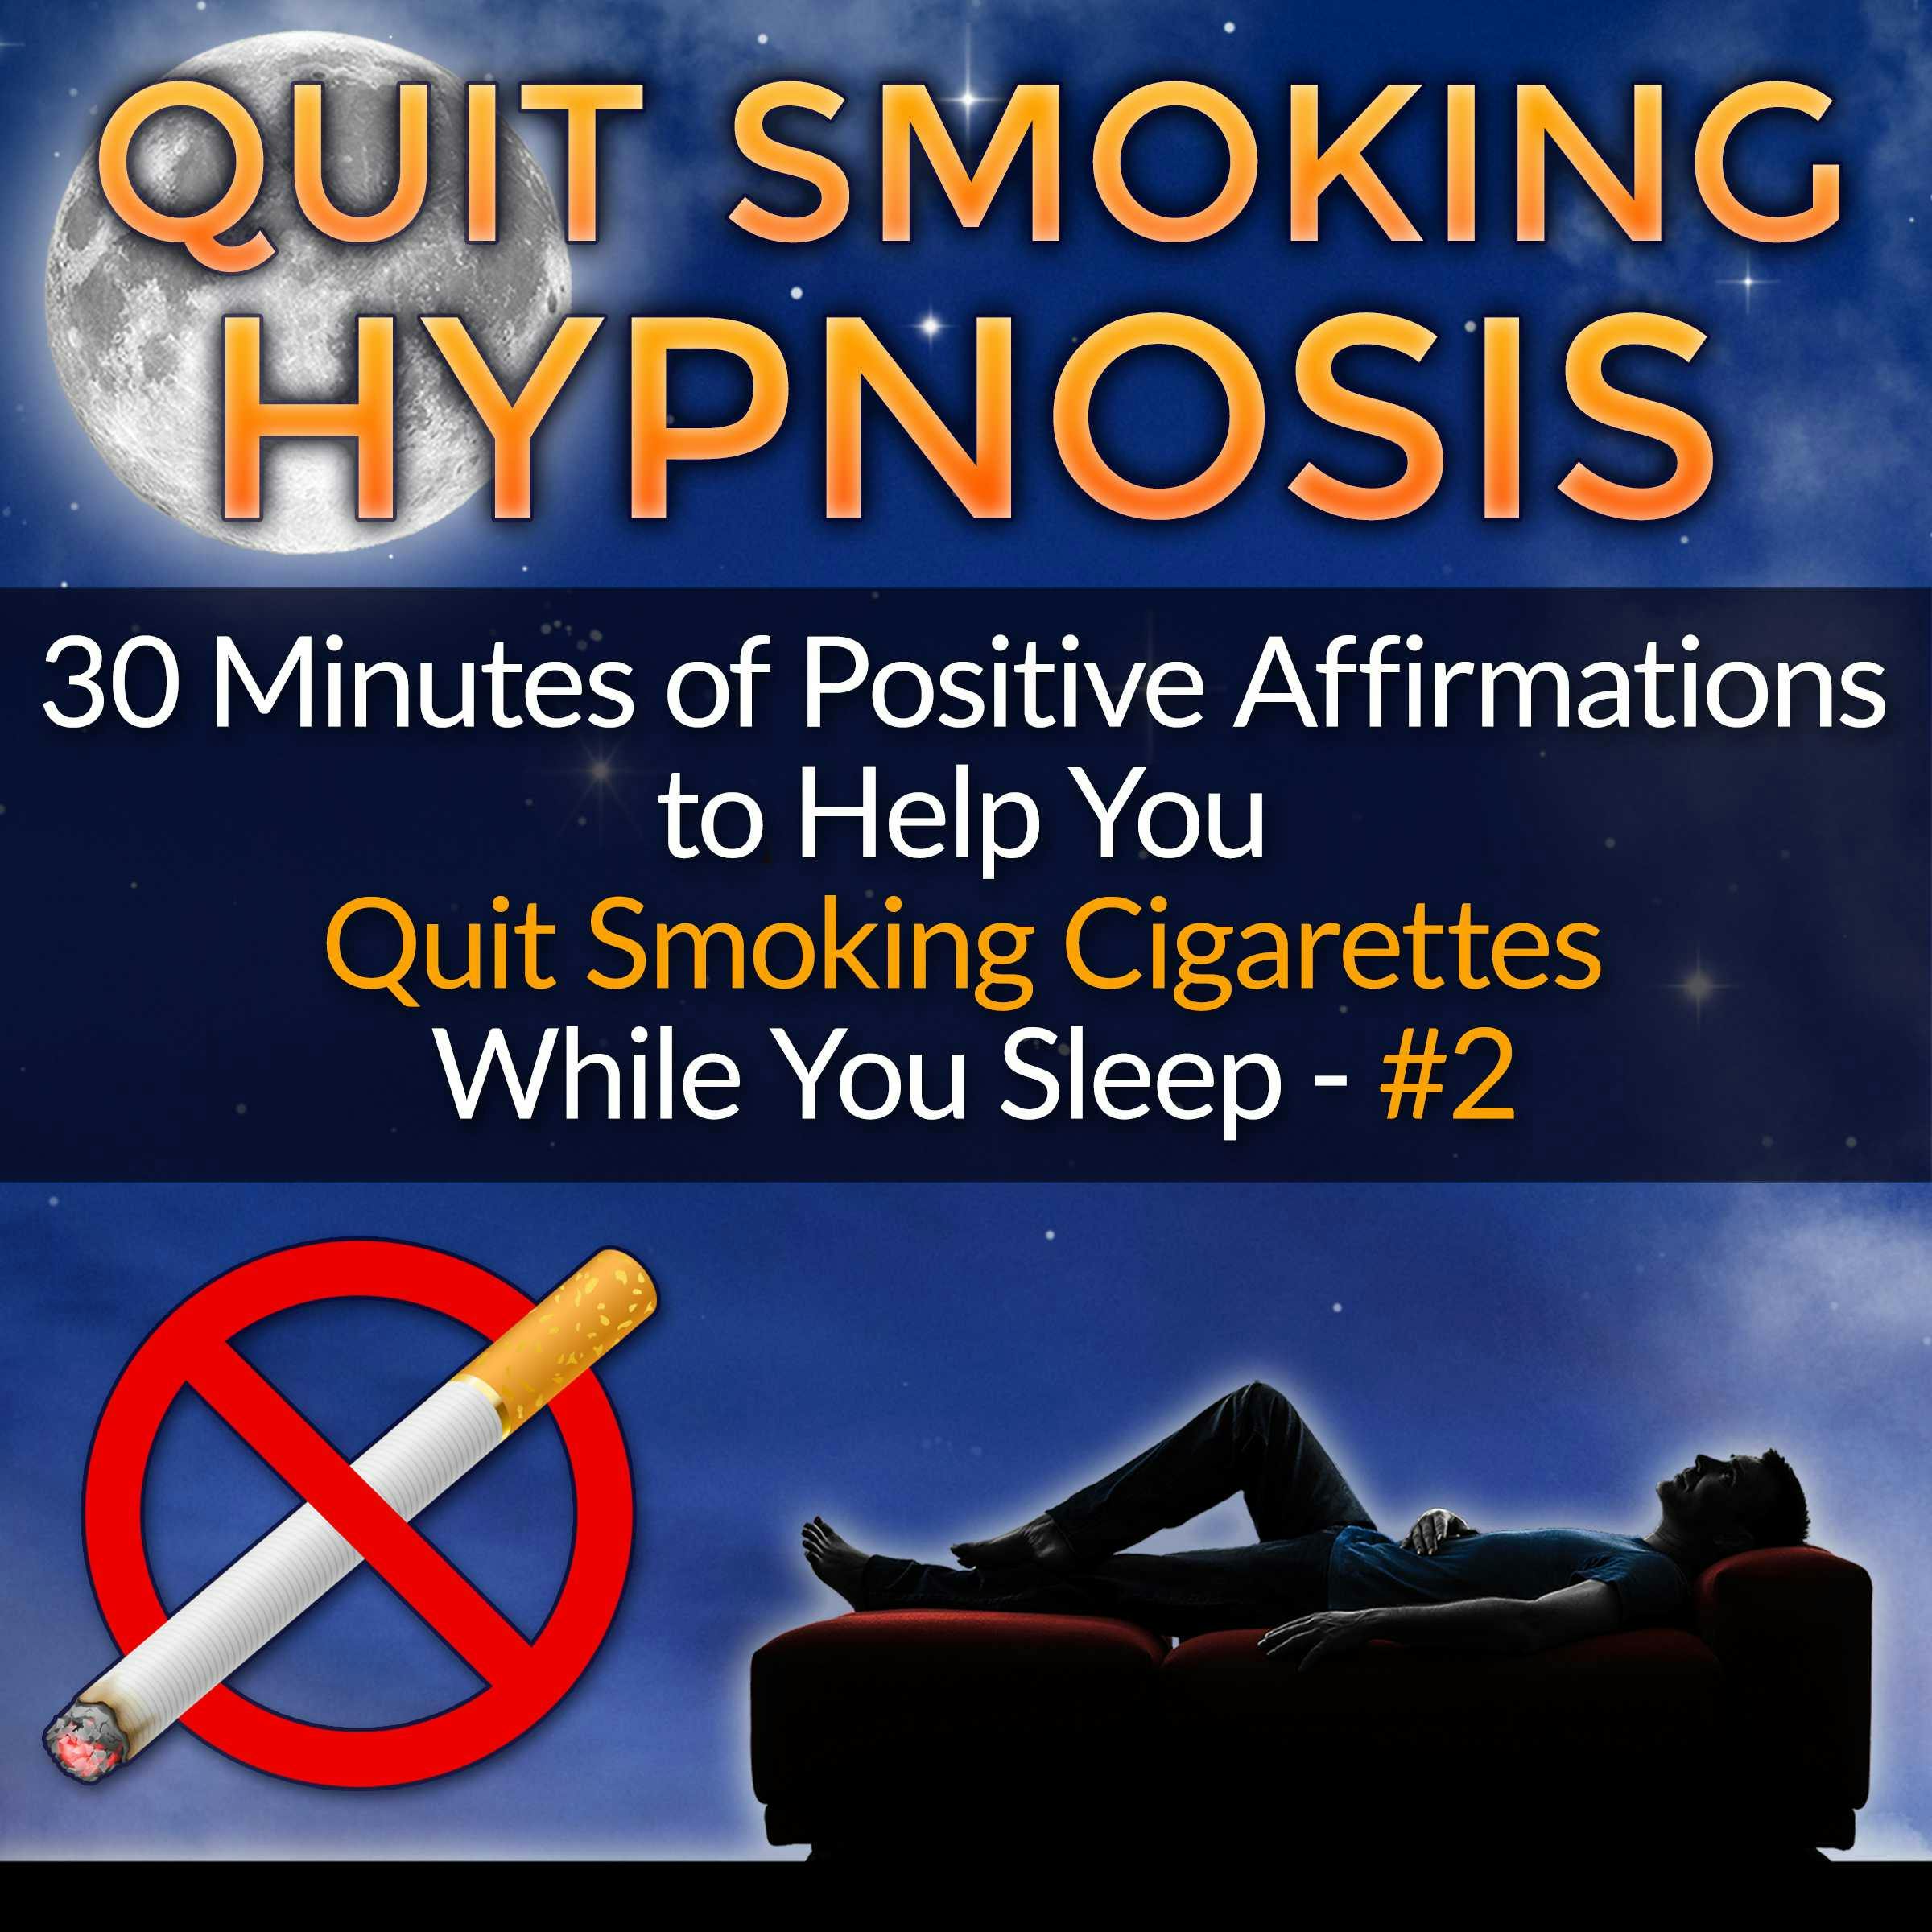 Quit Smoking Hypnosis: 30 Minutes of Positive Affirmations to Help You Quit Smoking Cigarettes While You Sleep #2 - Mindfulness Training